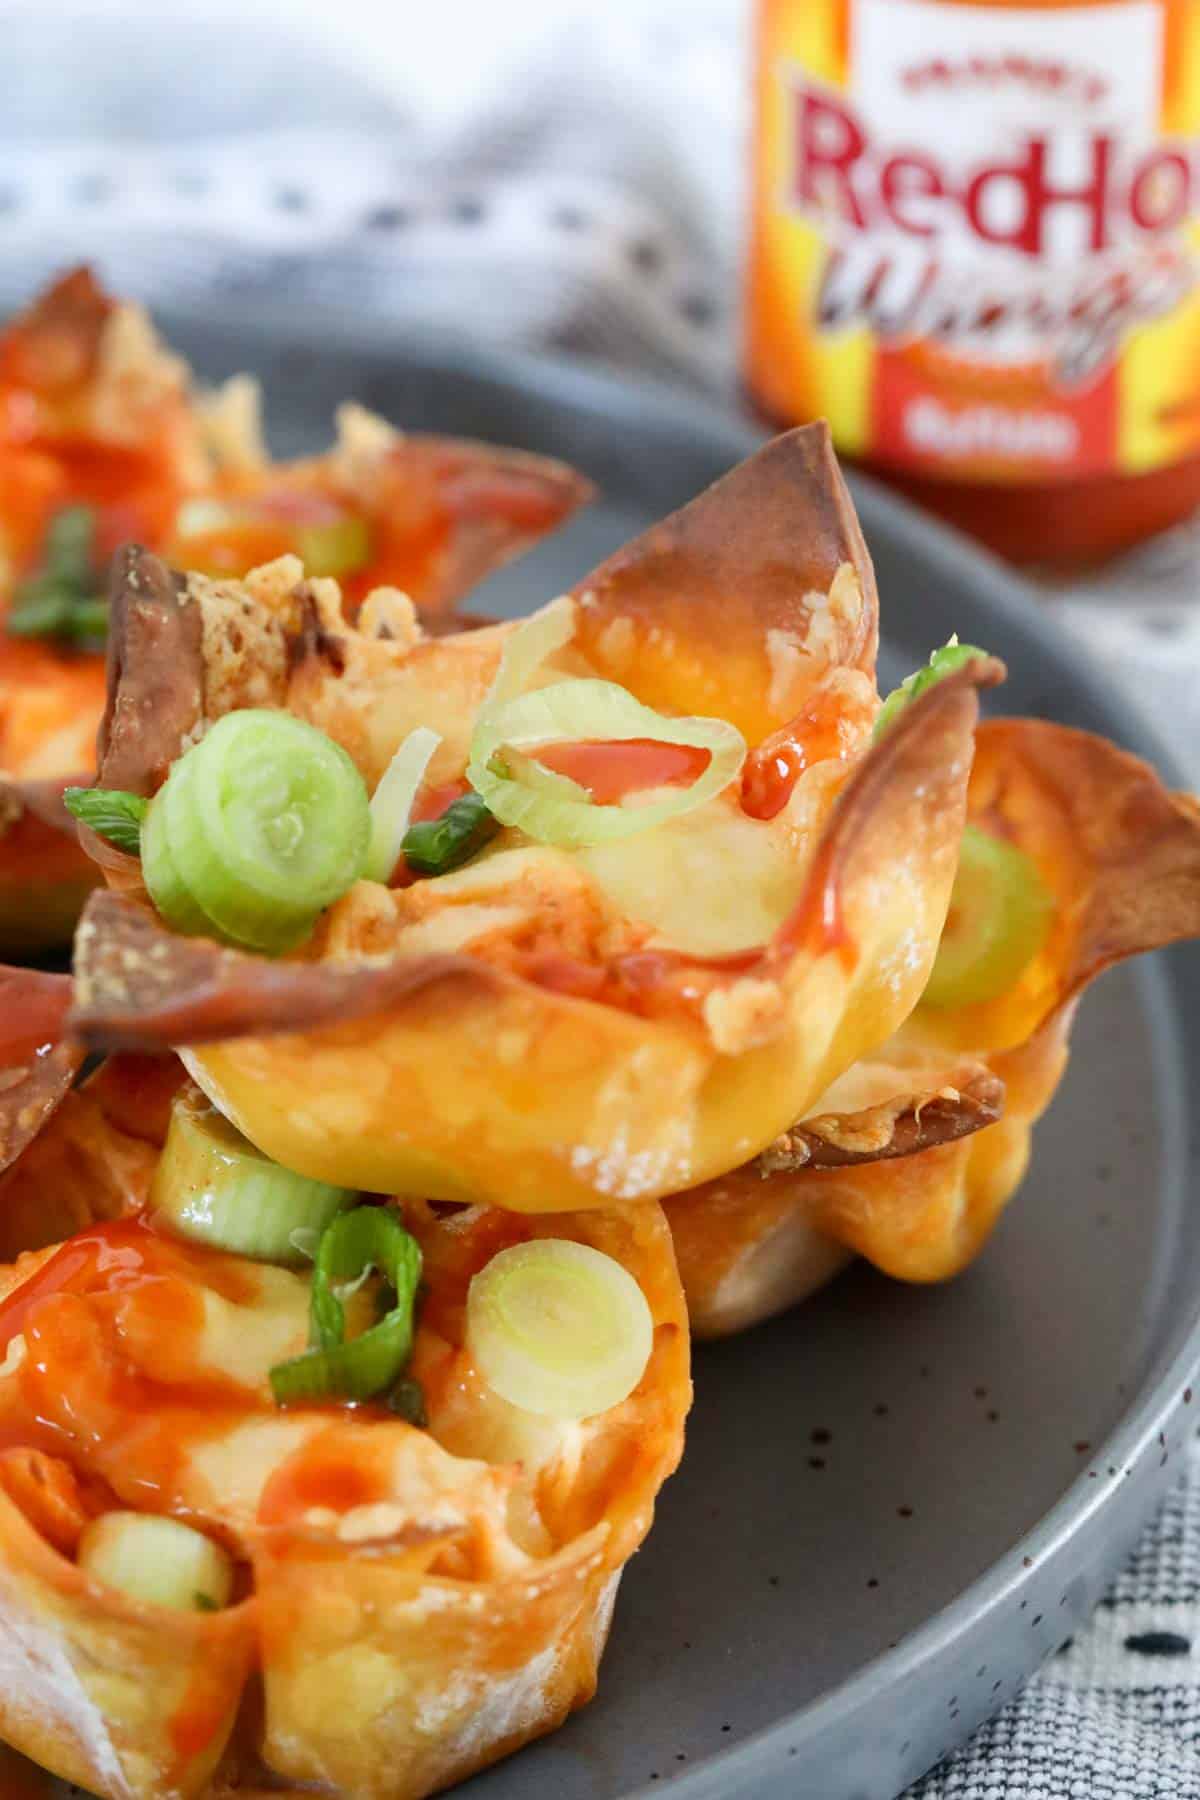 Wonton wrappers filled with creamy hot sauce chicken.